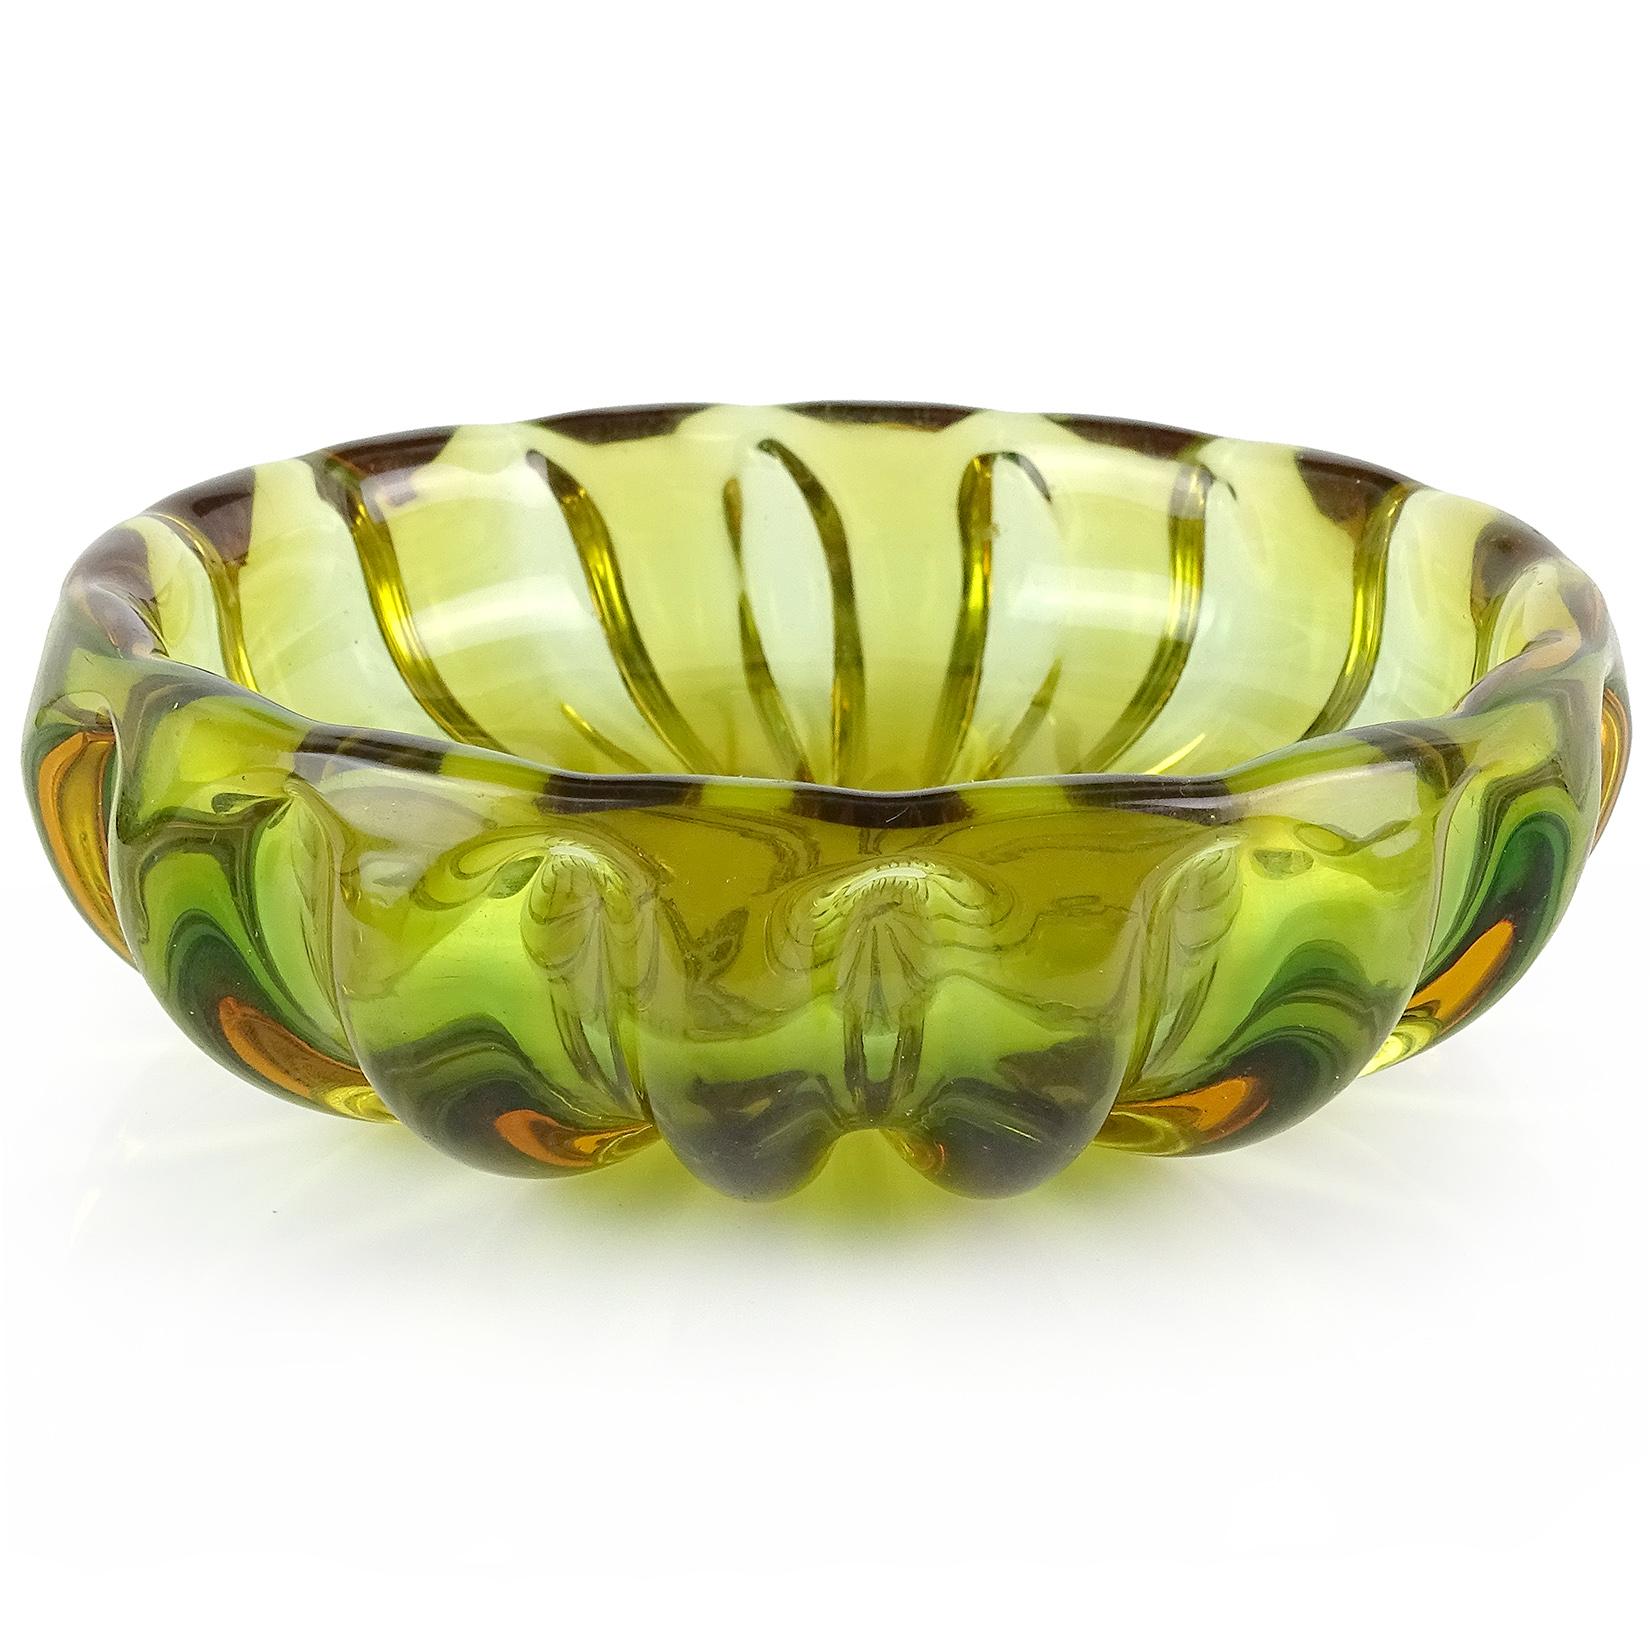 Beautiful vintage Murano hand blown Sommerso green and orange Italian art glass round bowl / vide-poche. Documented to designer Alfredo Barbini. It has a ribbed pattern throughout, with the bottom edge showing the orange layer. Would make a great